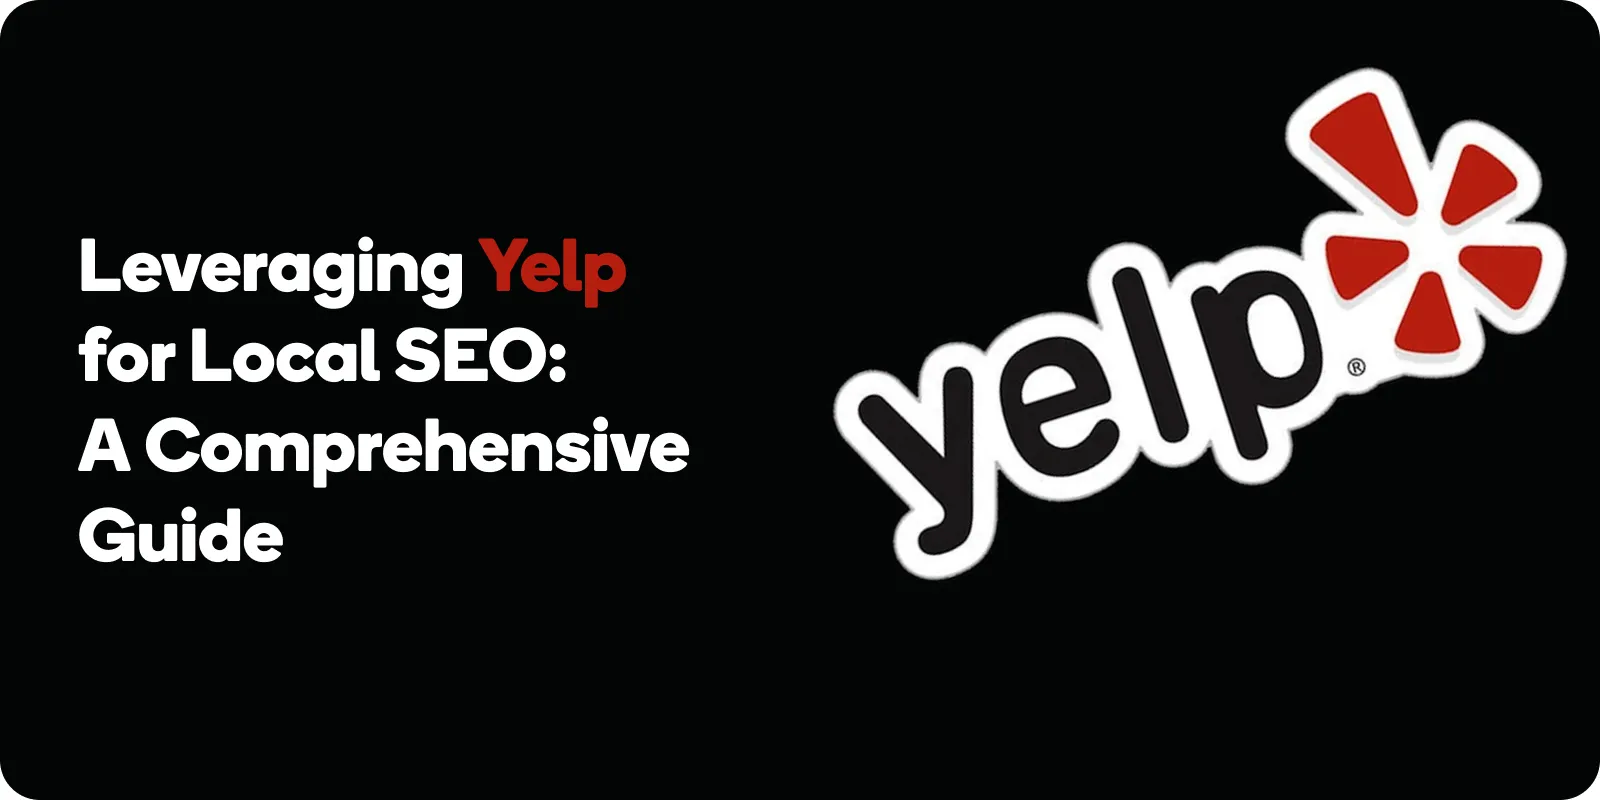 Leveraging Yelp for Local SEO: A Comprehensive Guide